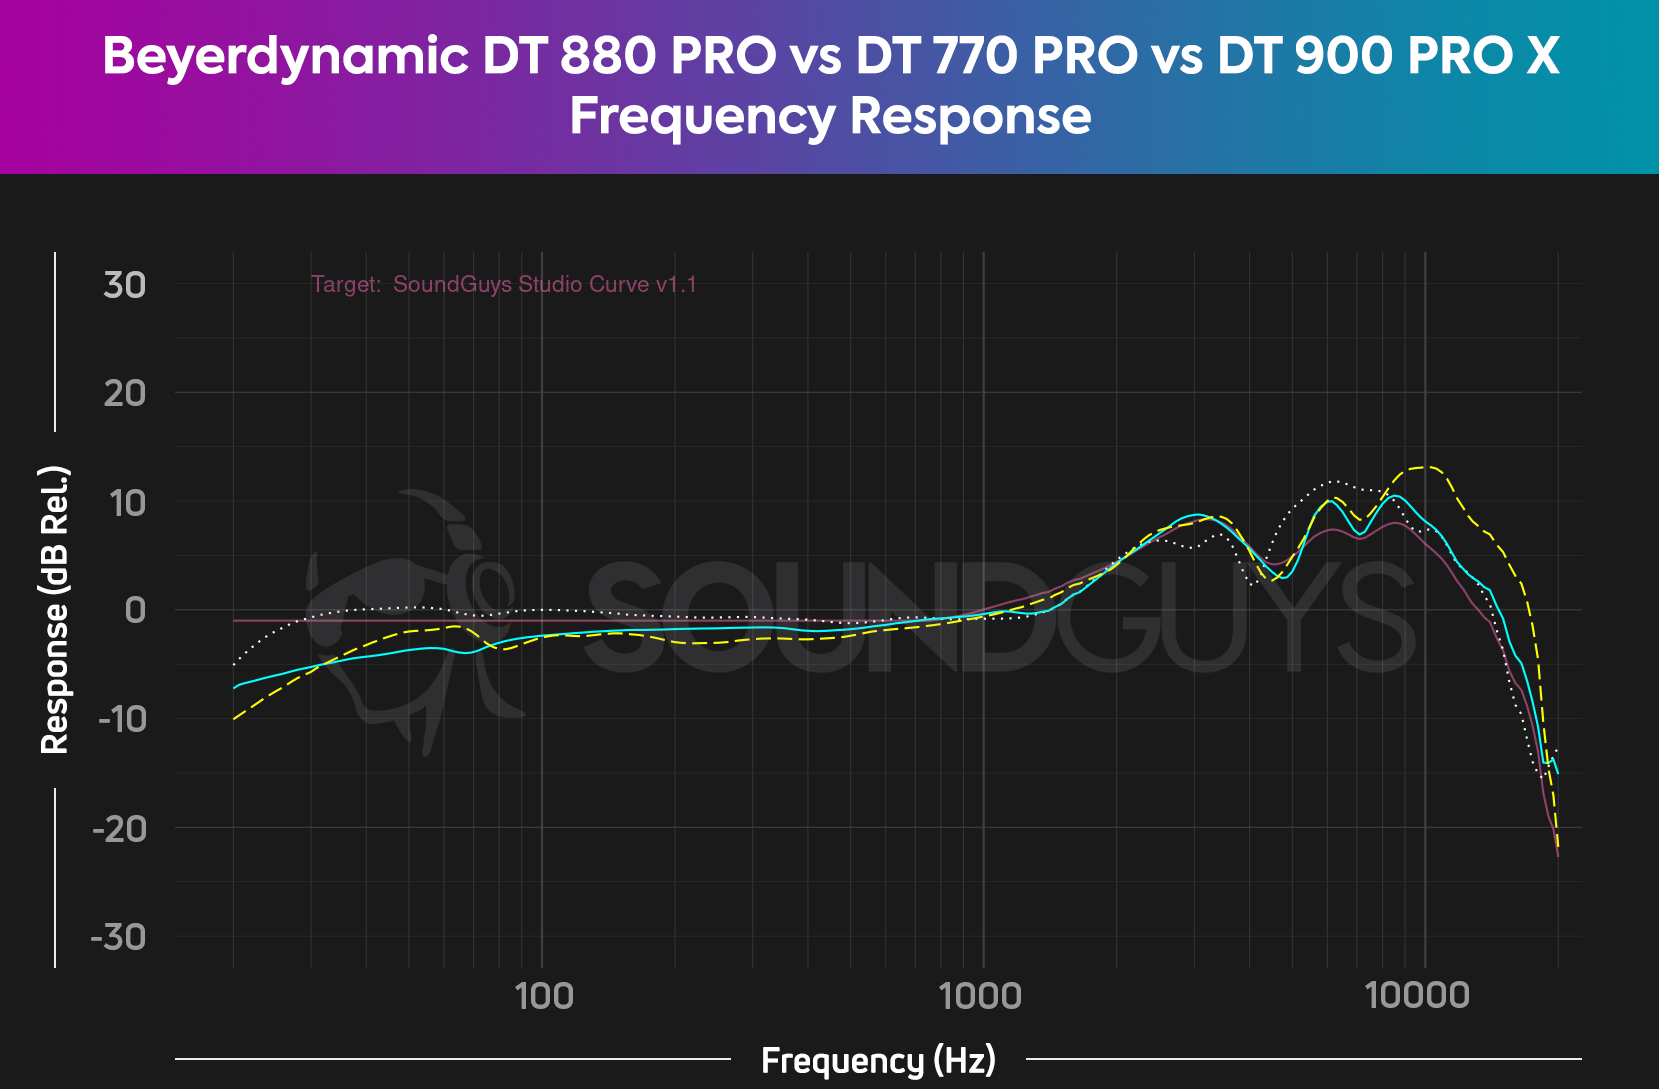 A frequency response chart compares the Beyerdynamic DT 880 PRO (cyan) to the Beyerdynamic DT 770 PRO (yellow dash) and Beyerdynamic DT 900 PRO X (white dots) against our Studio Curve V1.1 in pink.